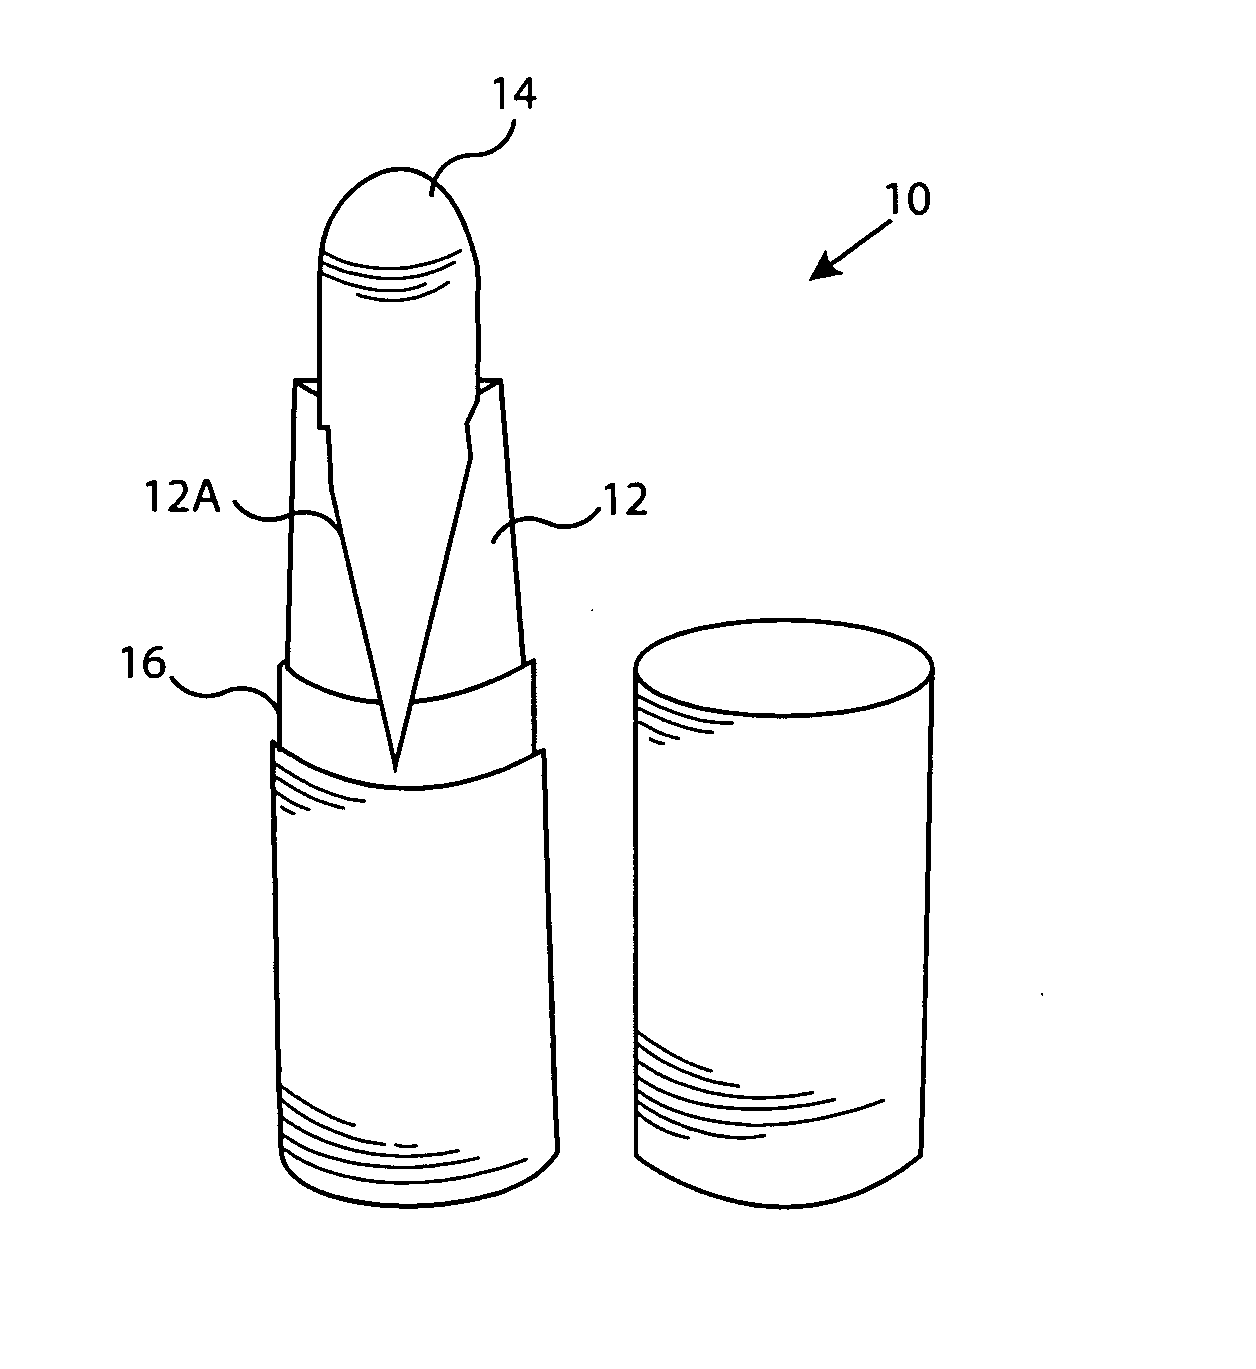 System for reducing residual material retained in a dispenser